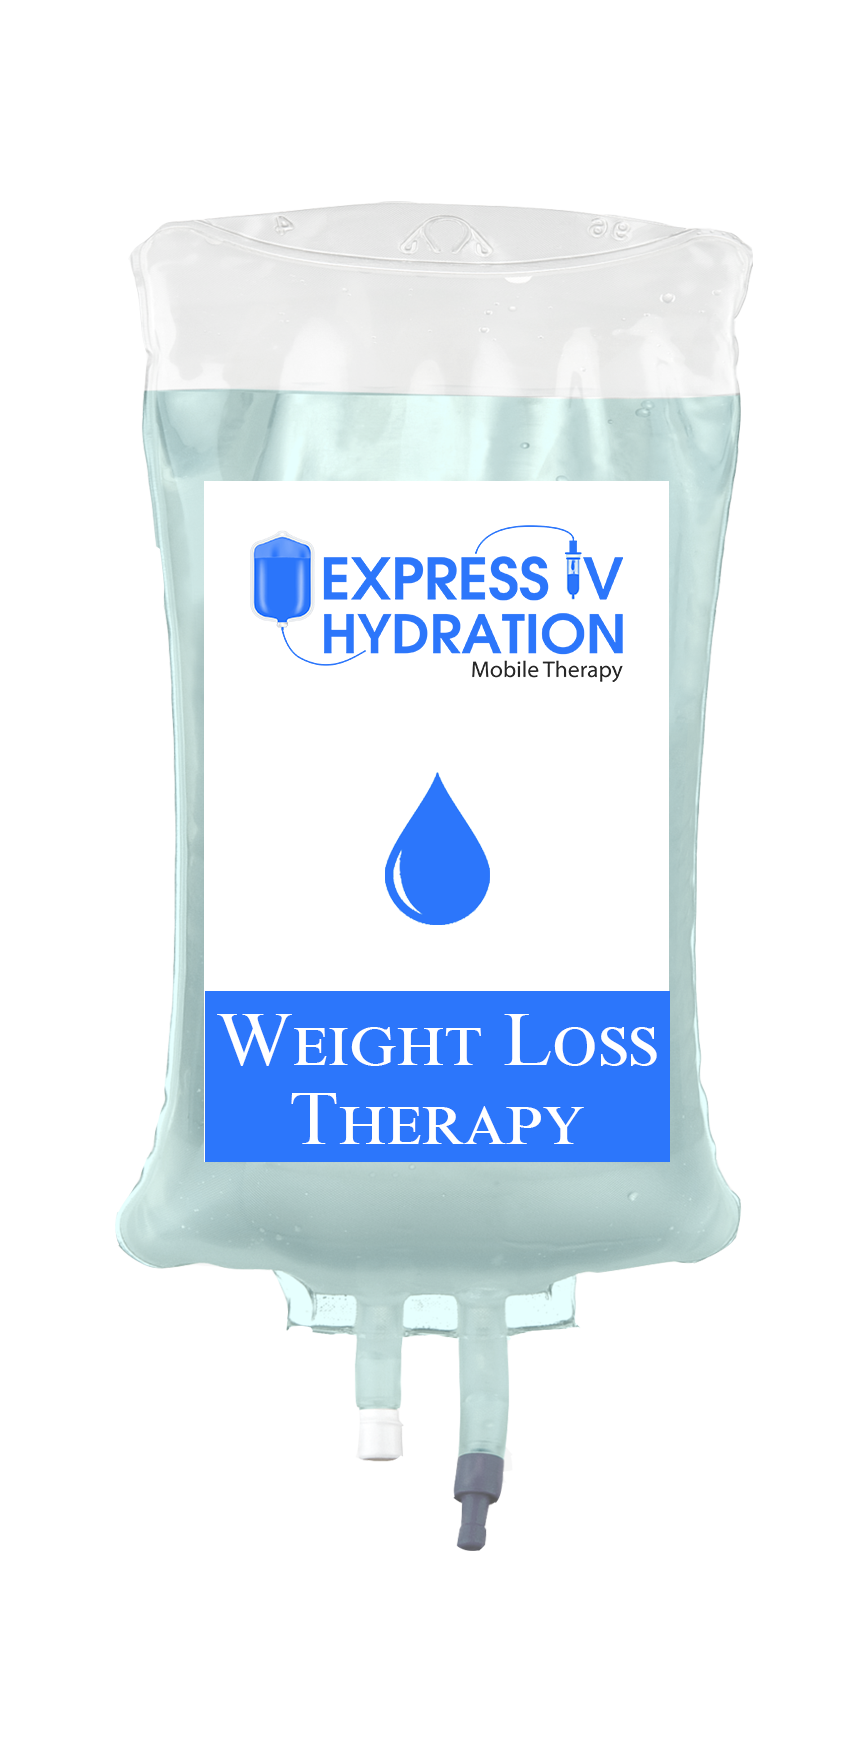 WEIGHT LOSS THERAPY